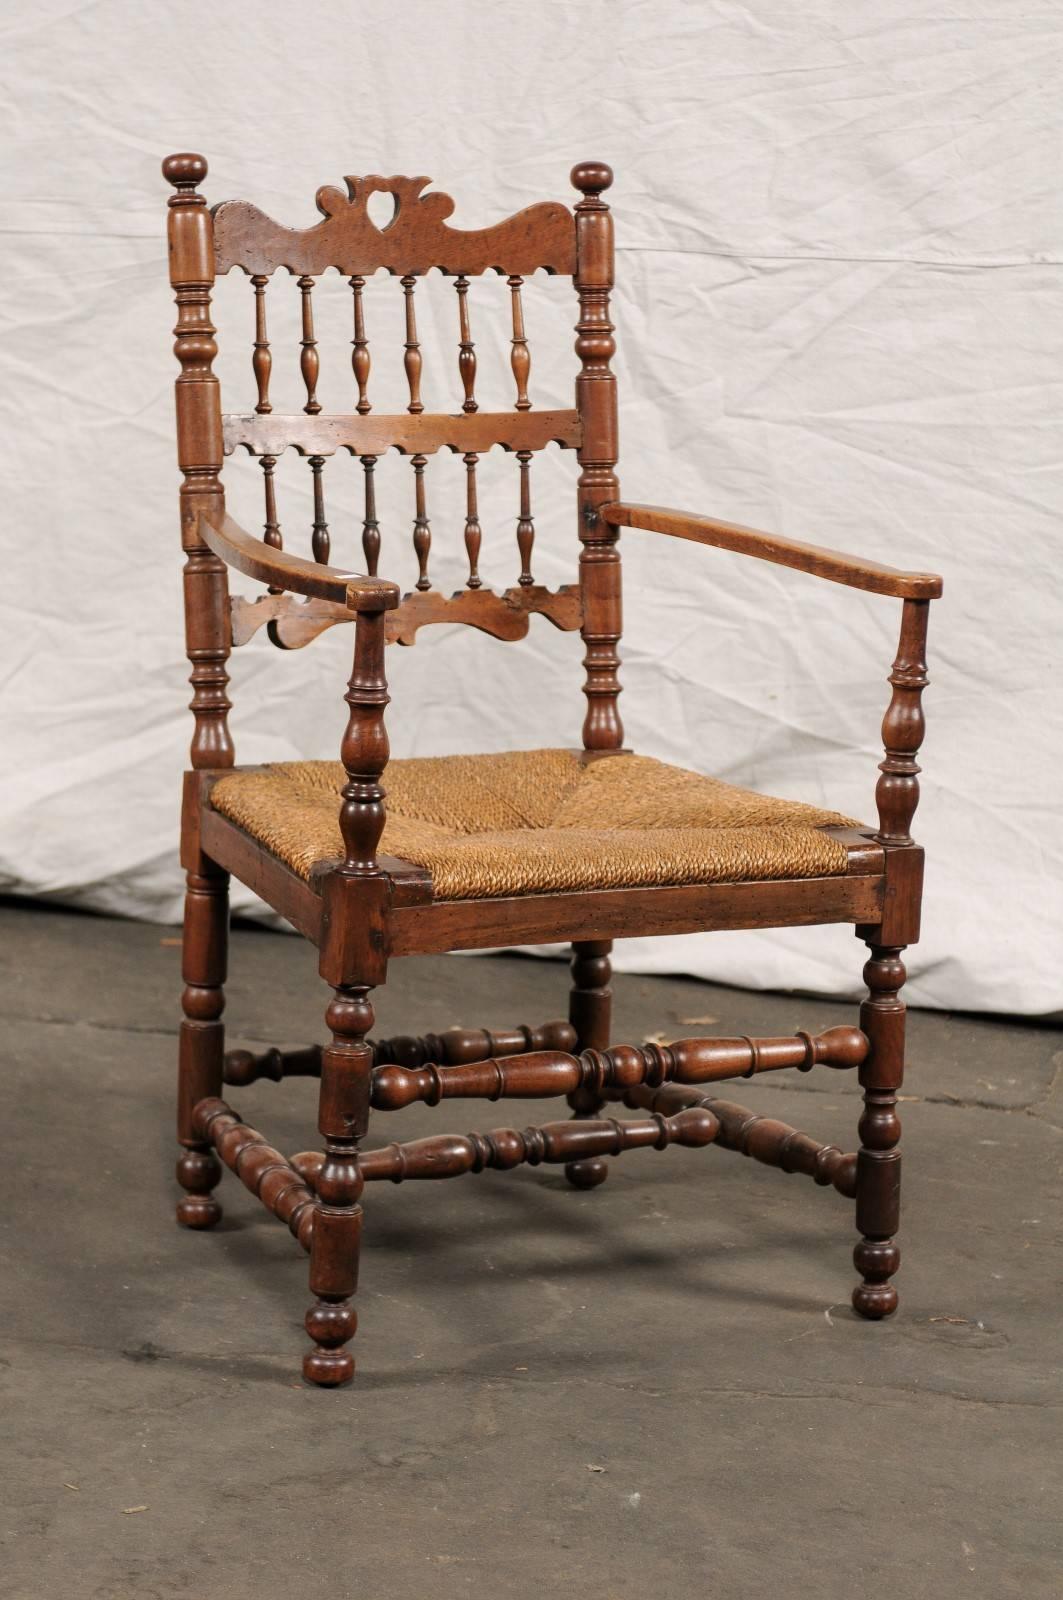 19th century continental Provençal armchair, spindle back, rush seat, turned stretchers and legs. Measures: Seat height 17